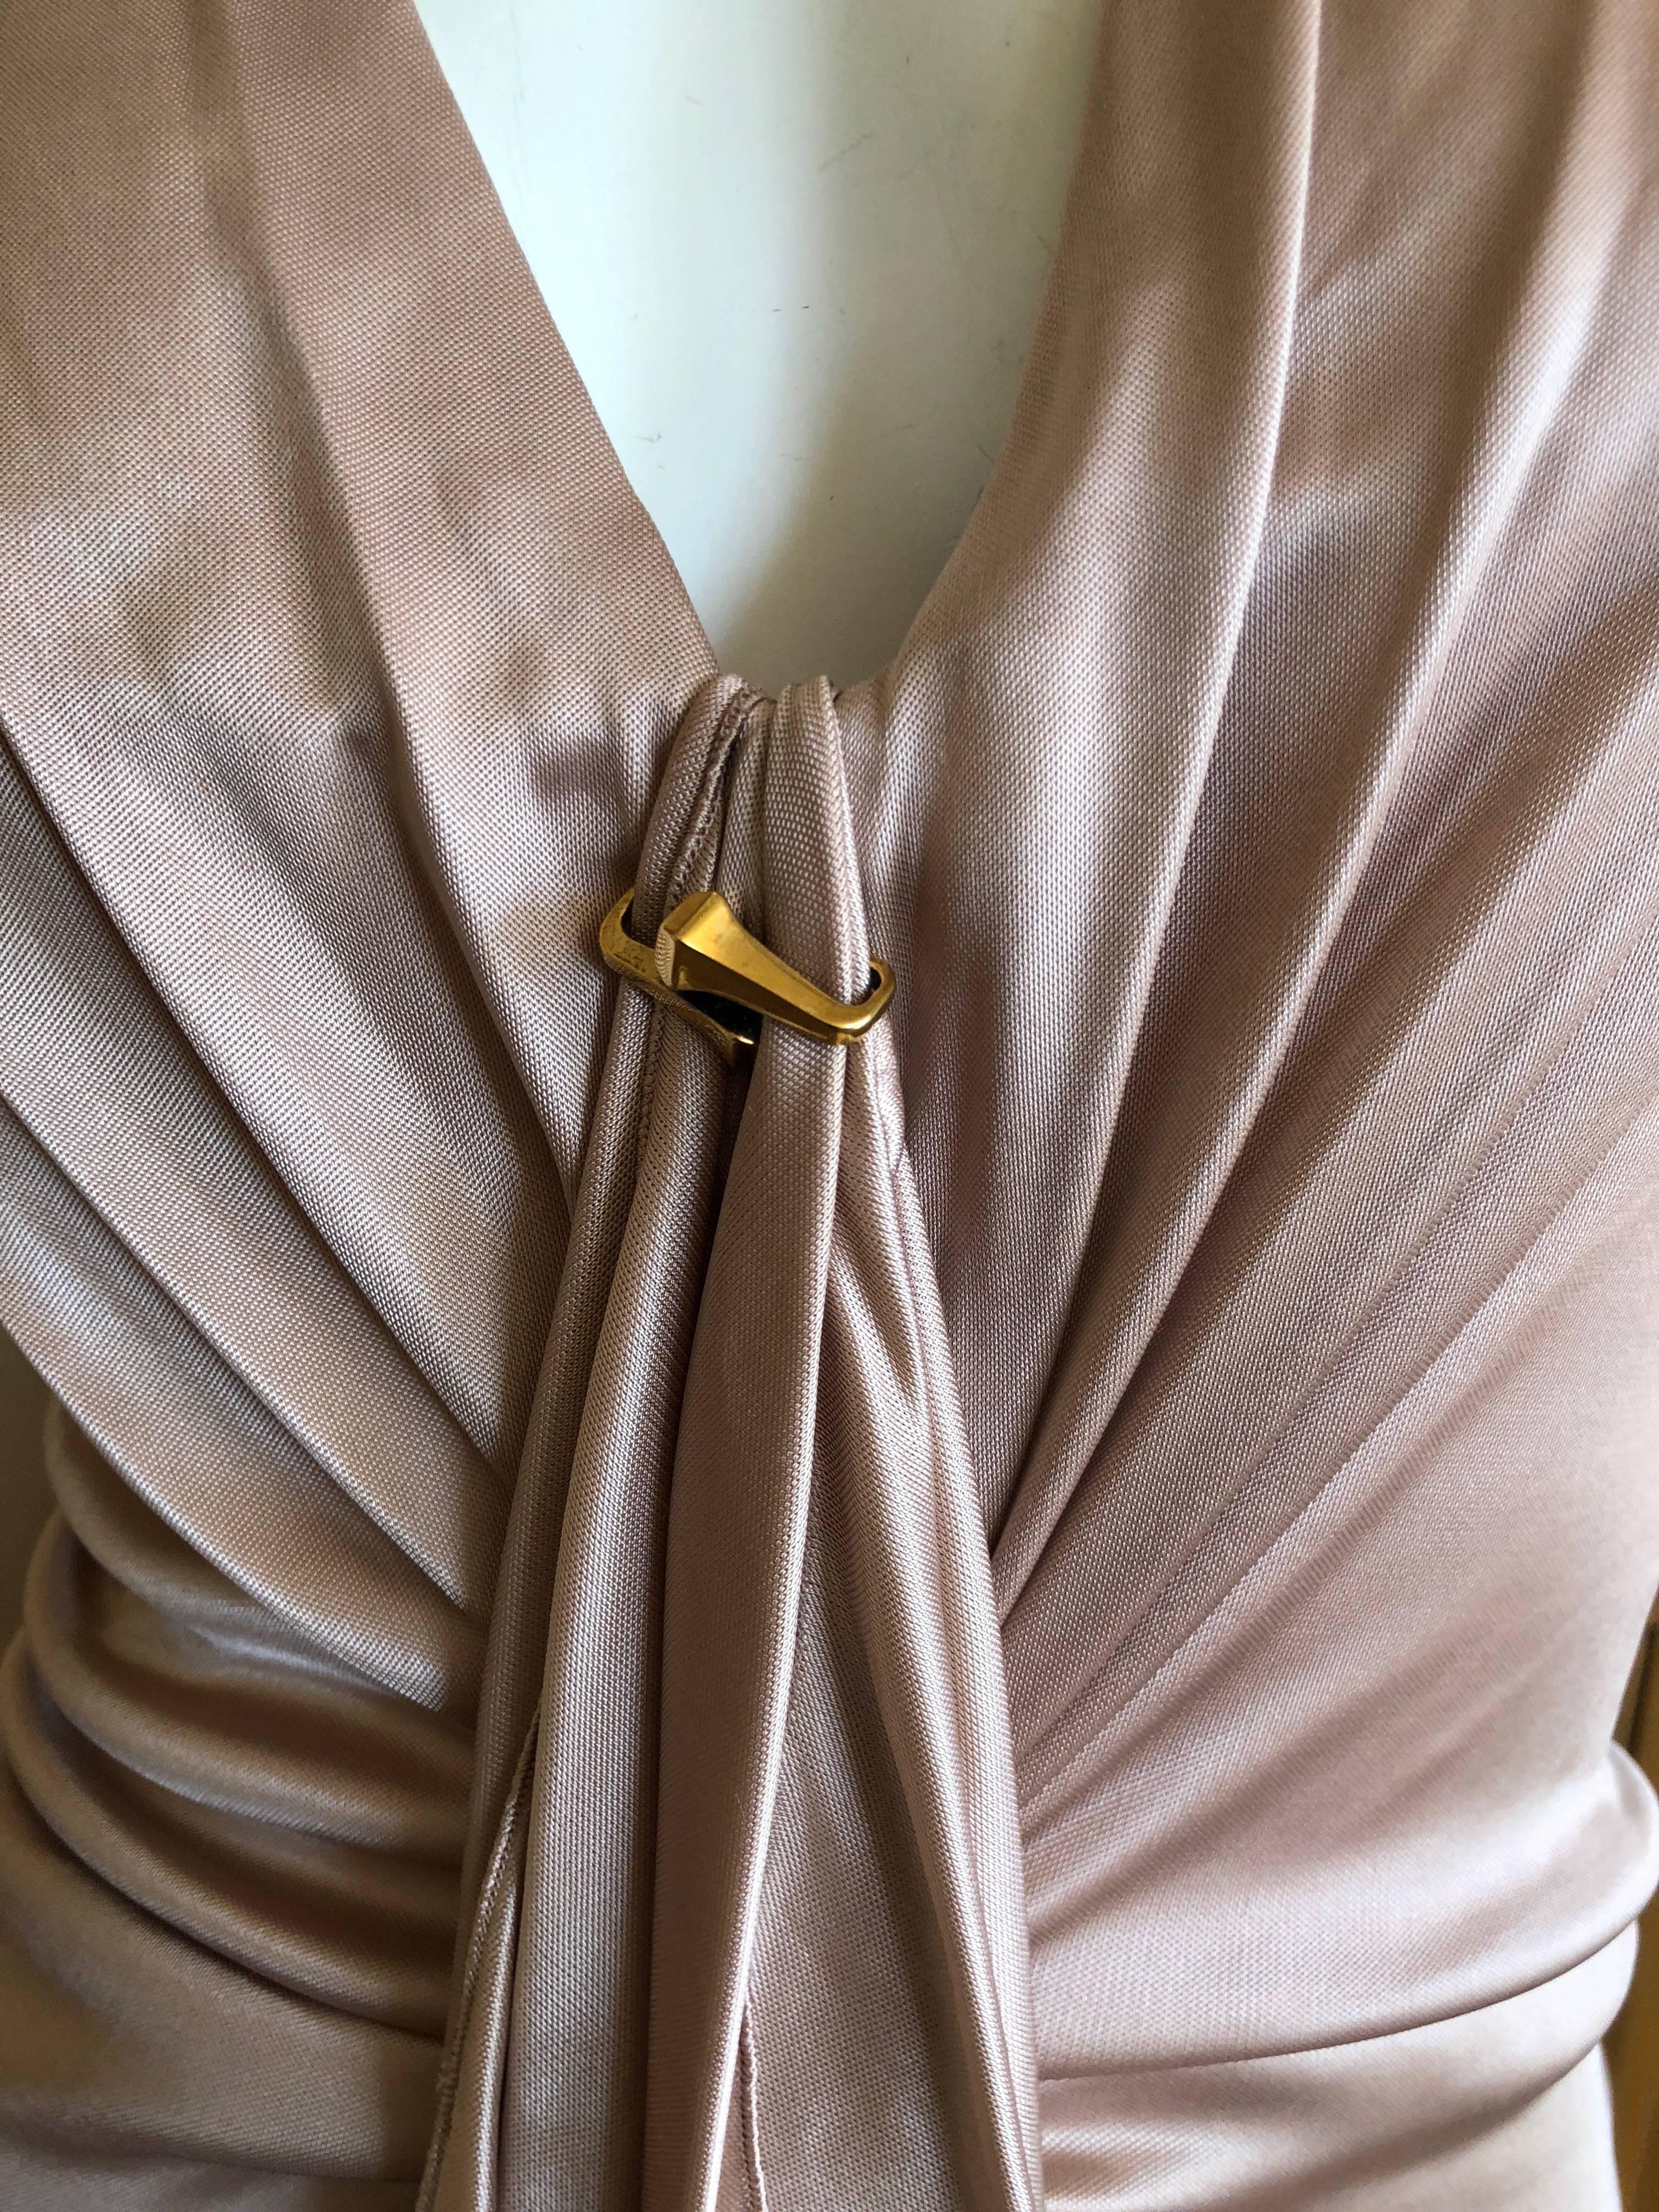 Gucci by Tom Ford Rose Gold Gathered Sleeveless Cocktail Dress For Sale 3